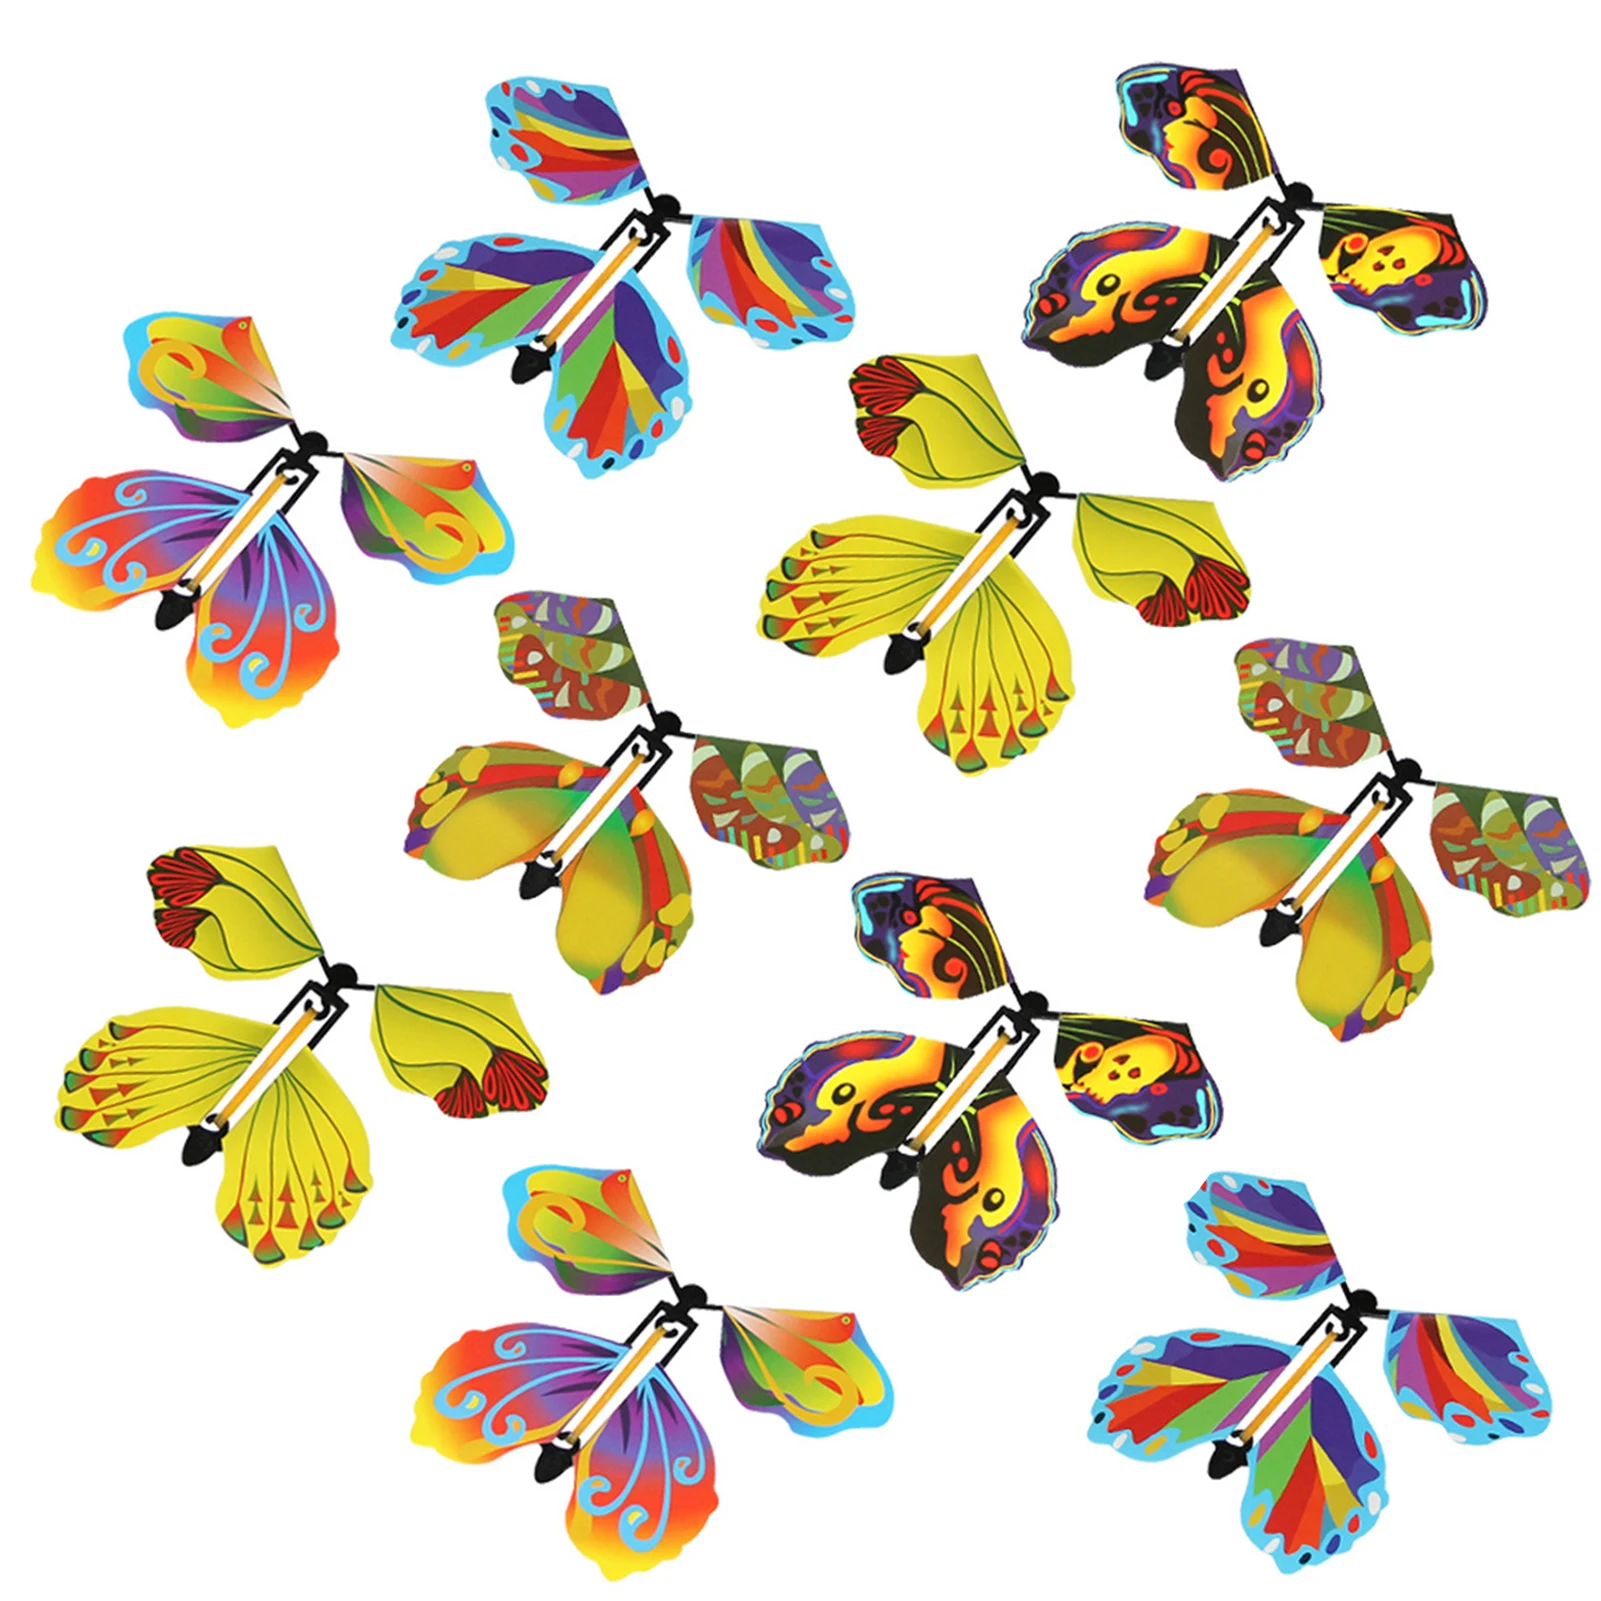 10 PMagic Flying Butterfly Cute High-quality Children Great Gift